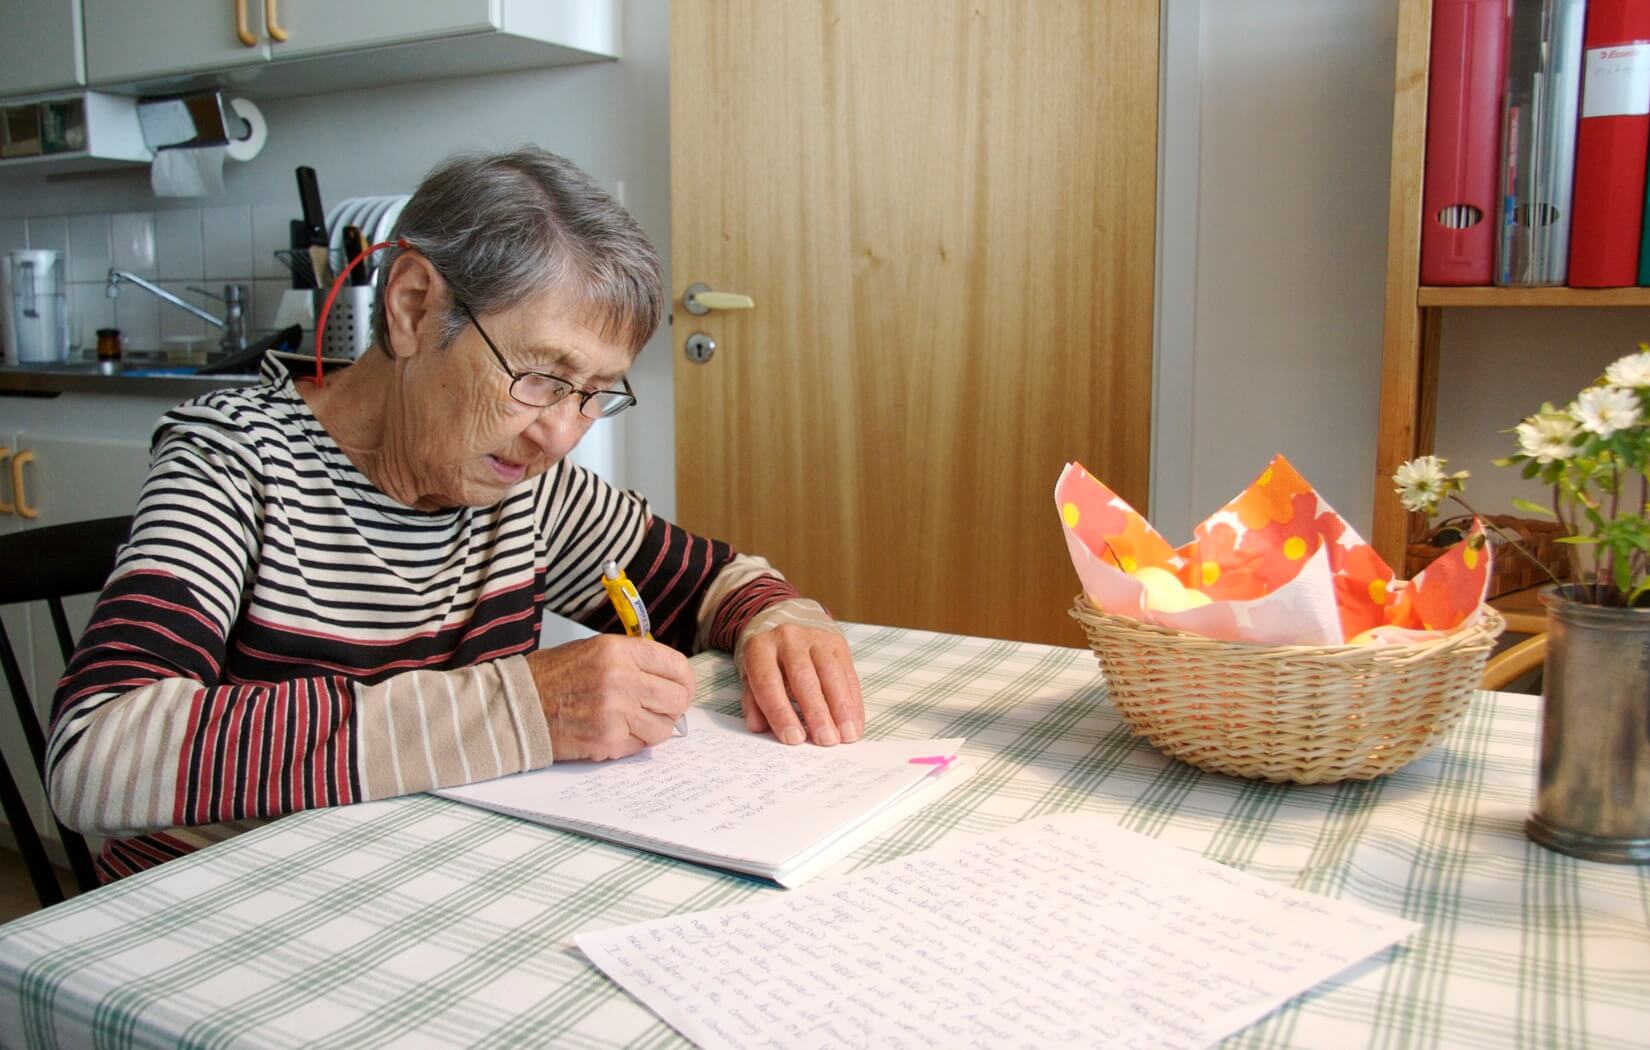 Still from A Small Act. A shot of an elderly woman sitting and writing on paper on a table in a kitchen, there are more papers with her handwriting, and there is also a basket on the table. The woman has short gray hair and glasses. It is daytime.